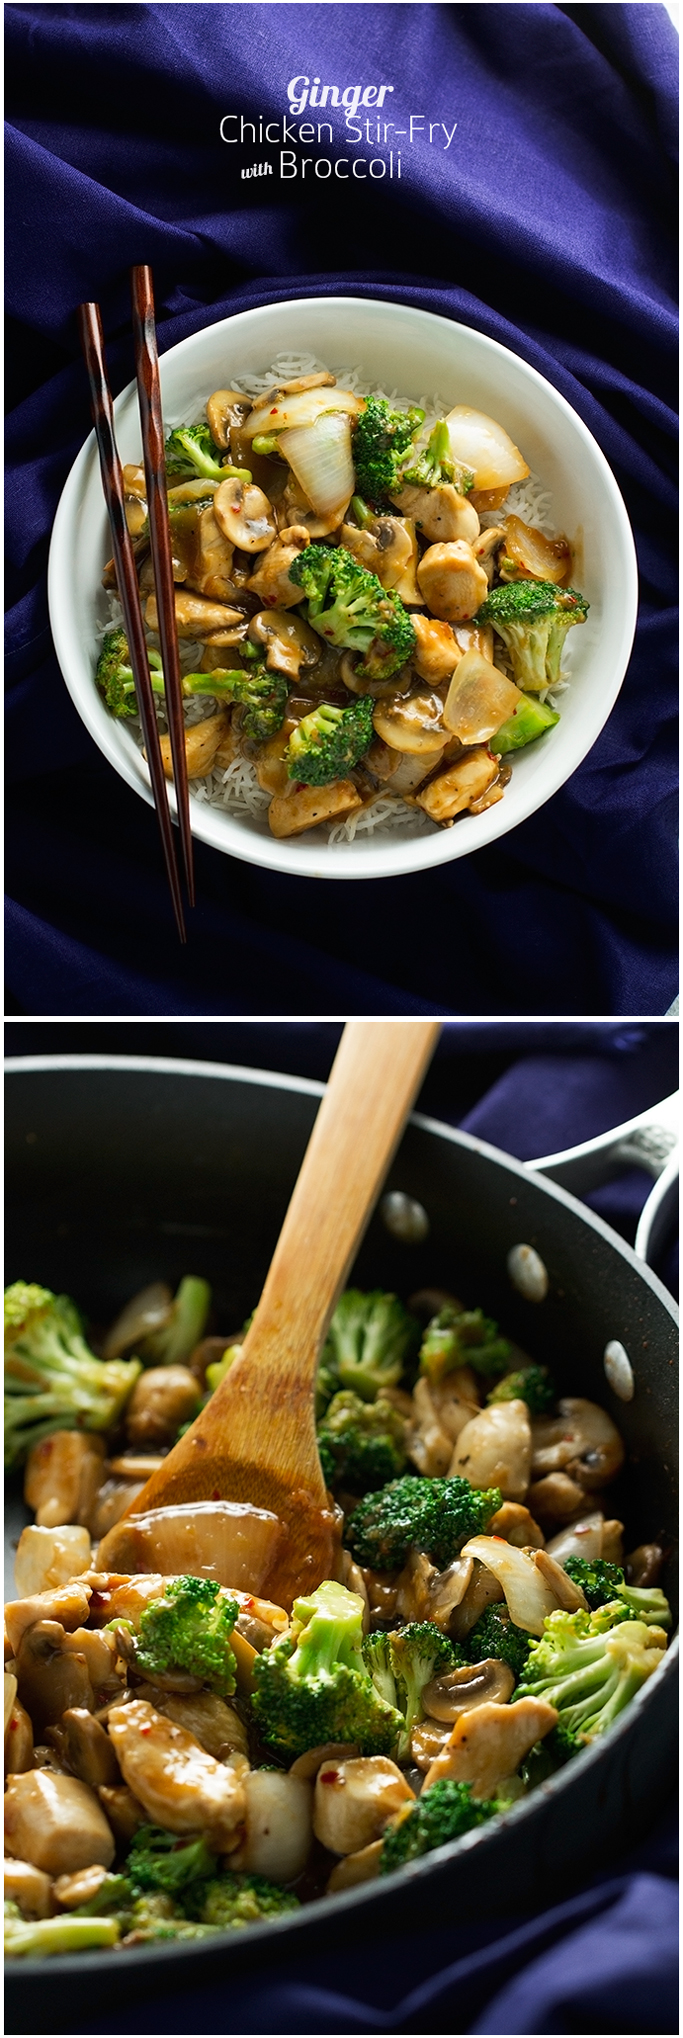 Ginger Chicken Stir-Fry with Broccoli - a quick 30 minute recipe that's loaded with flavor! You've gotta try it! #stirfry #chicken #gingerchicken | Littlespicejar.com